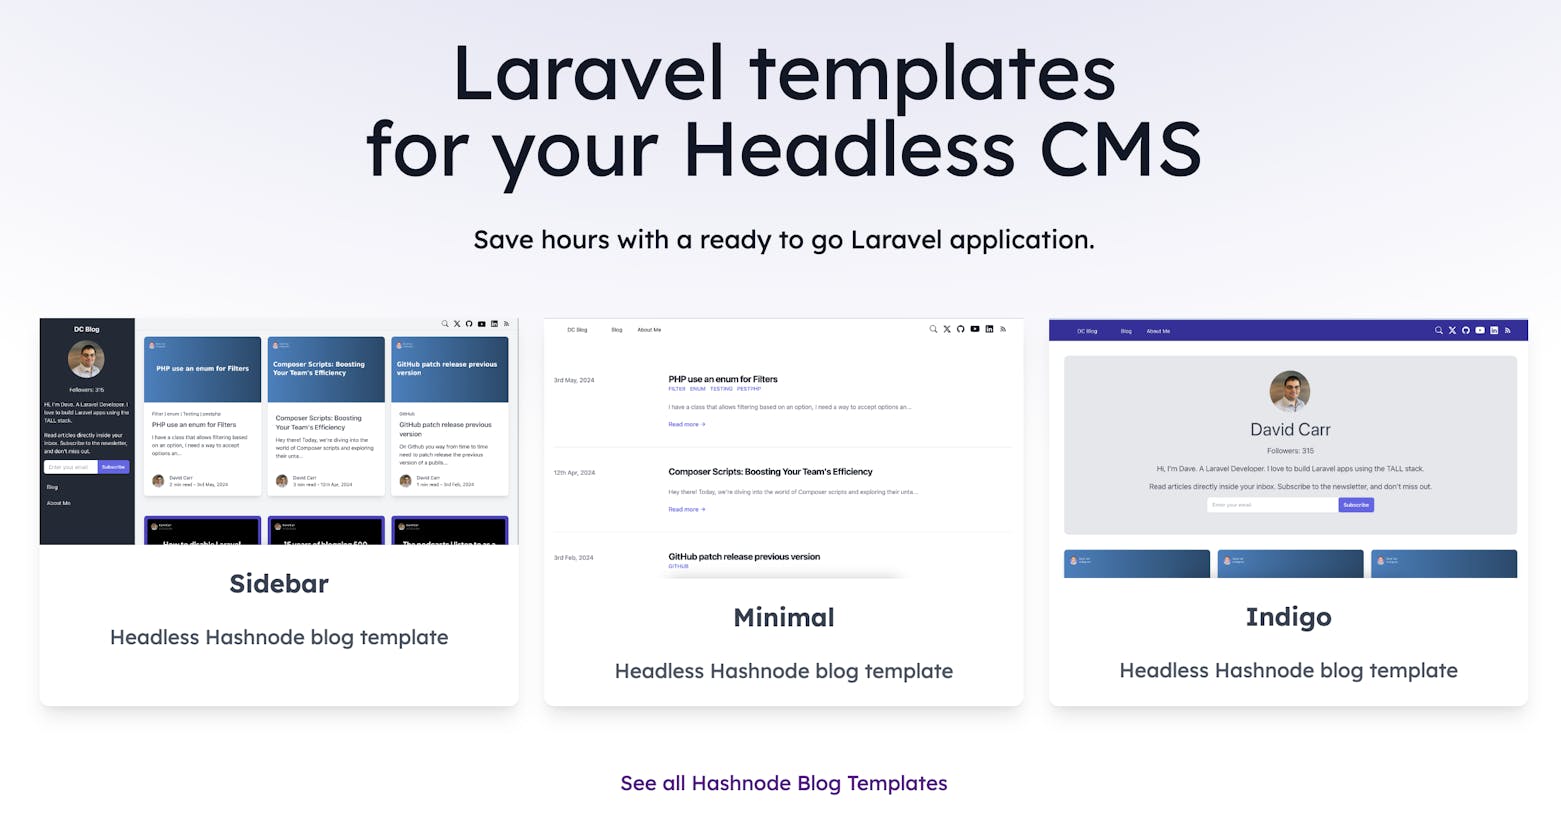 Customize Your Hashnode Blog Frontend with Headless Frontend and Laravel